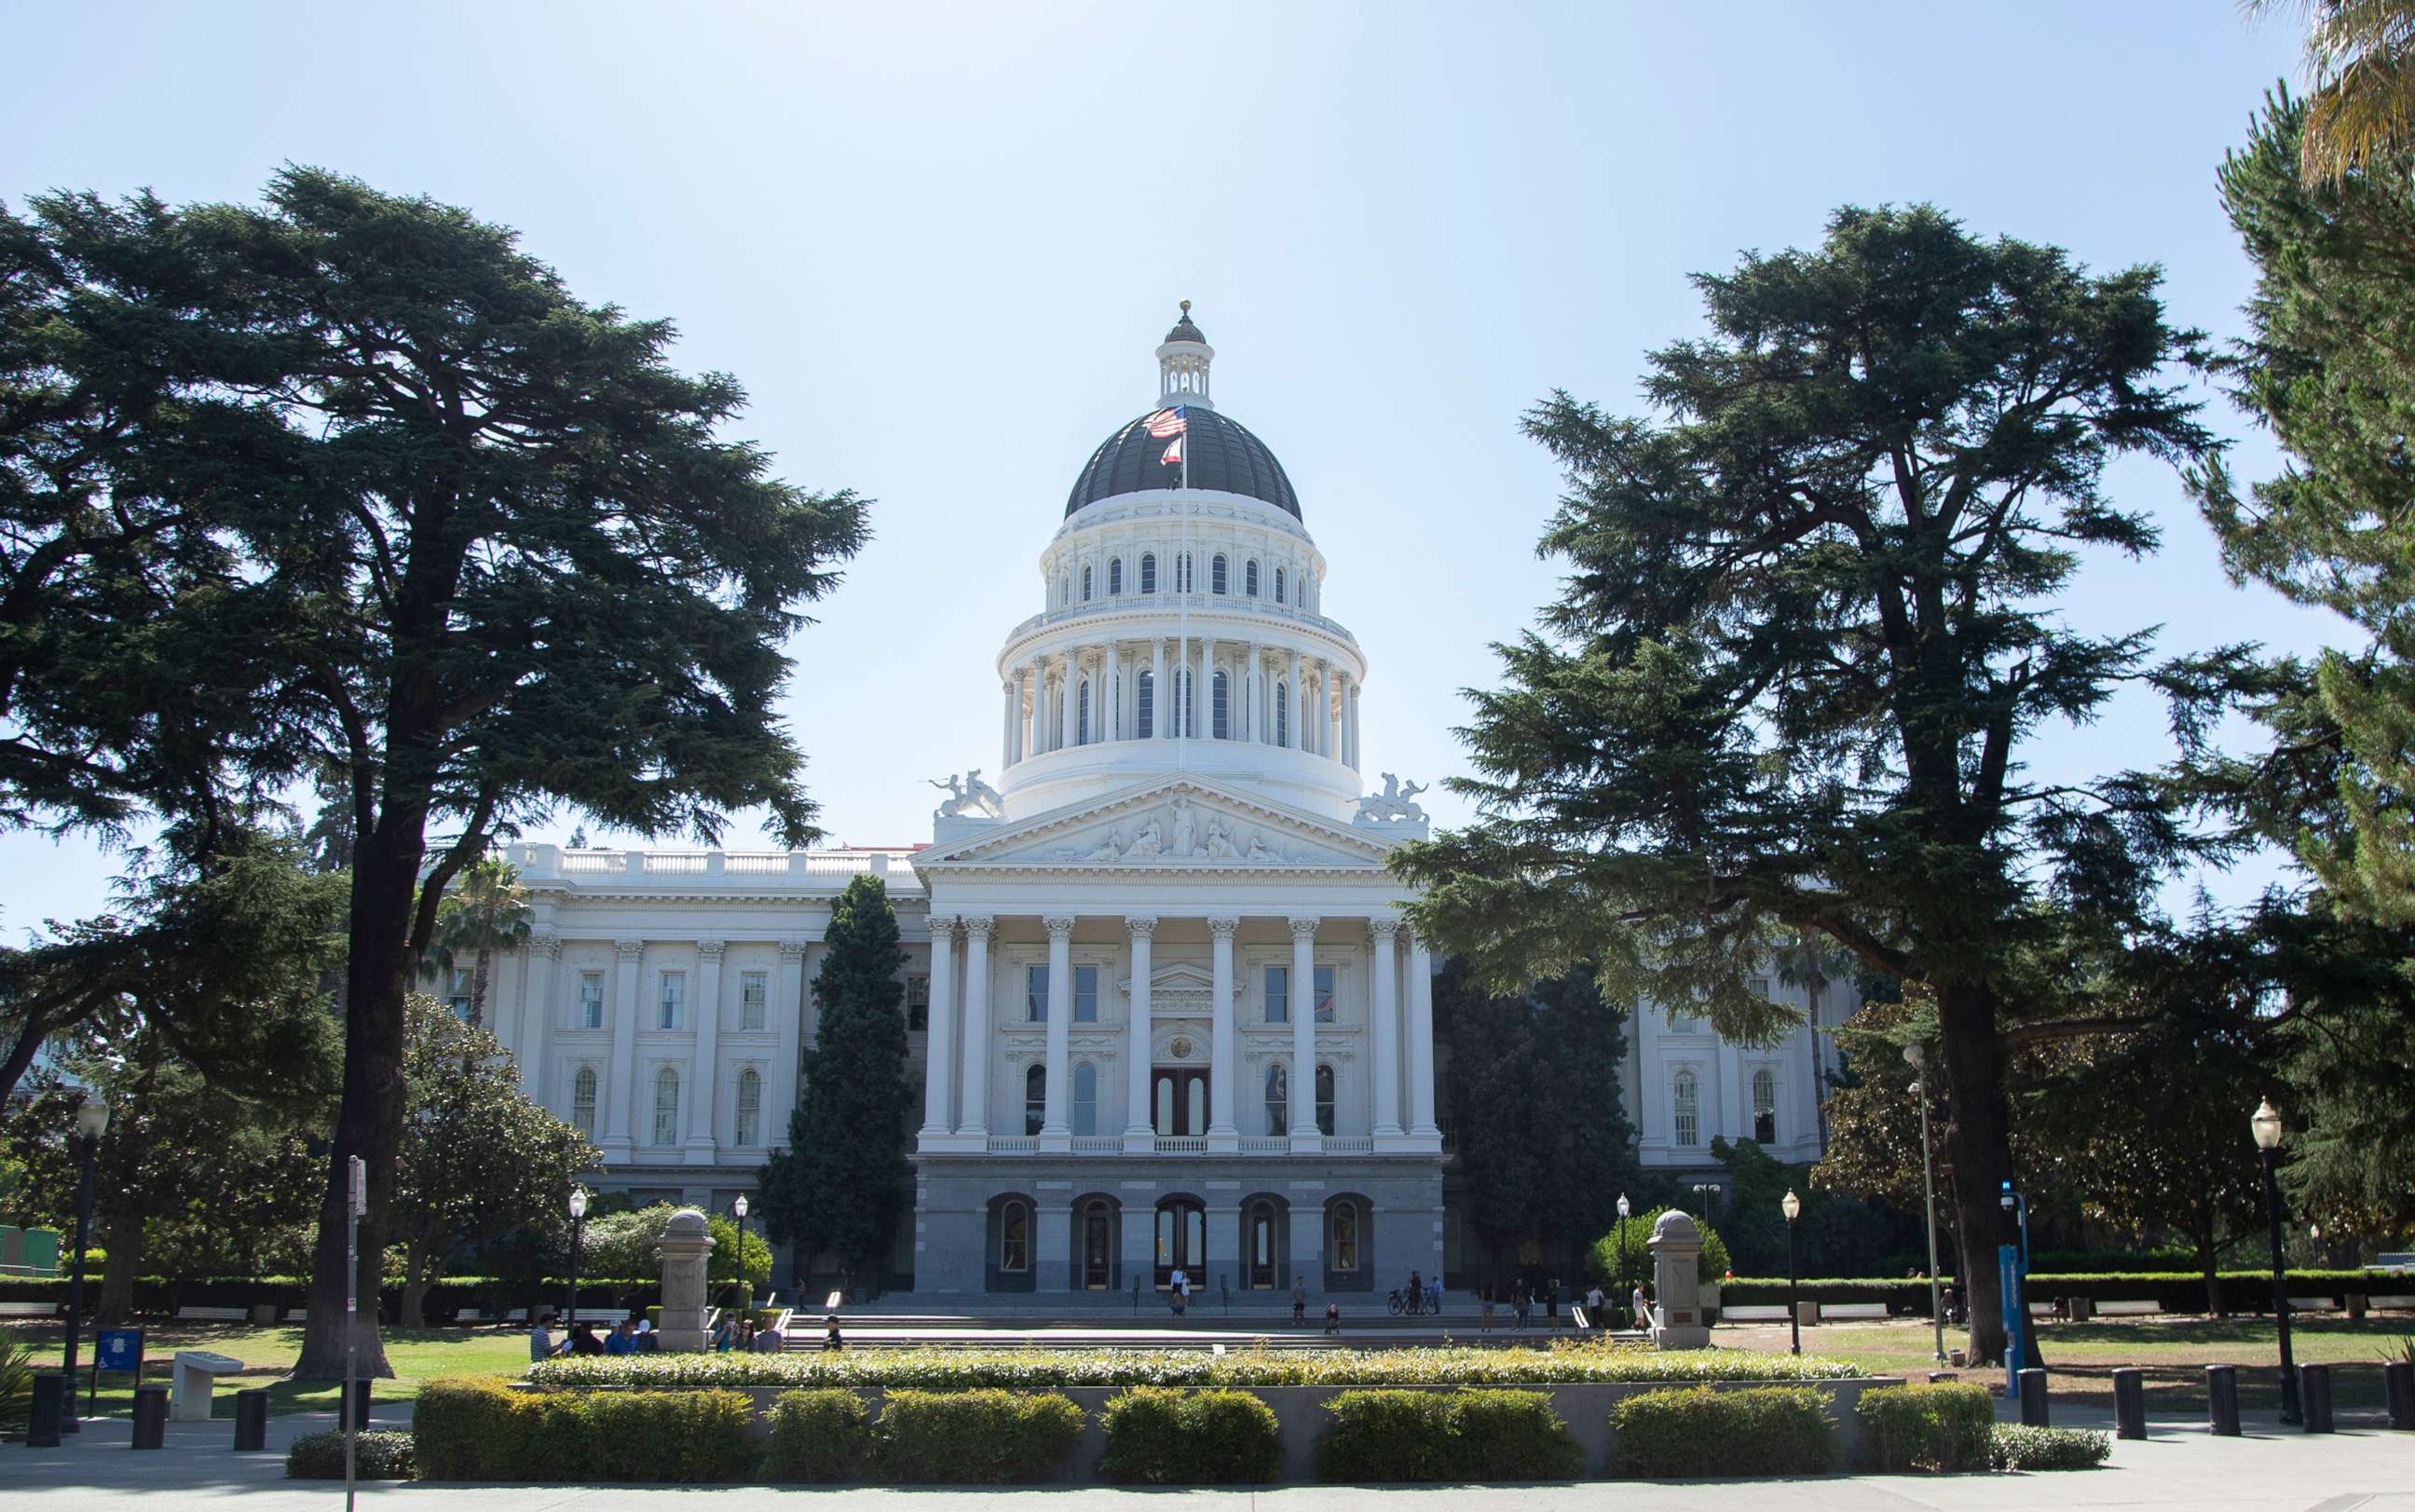 PHOTO: In this July 17, 2022, file photo, the California state Capitol is shown in Sacramento, Calif.